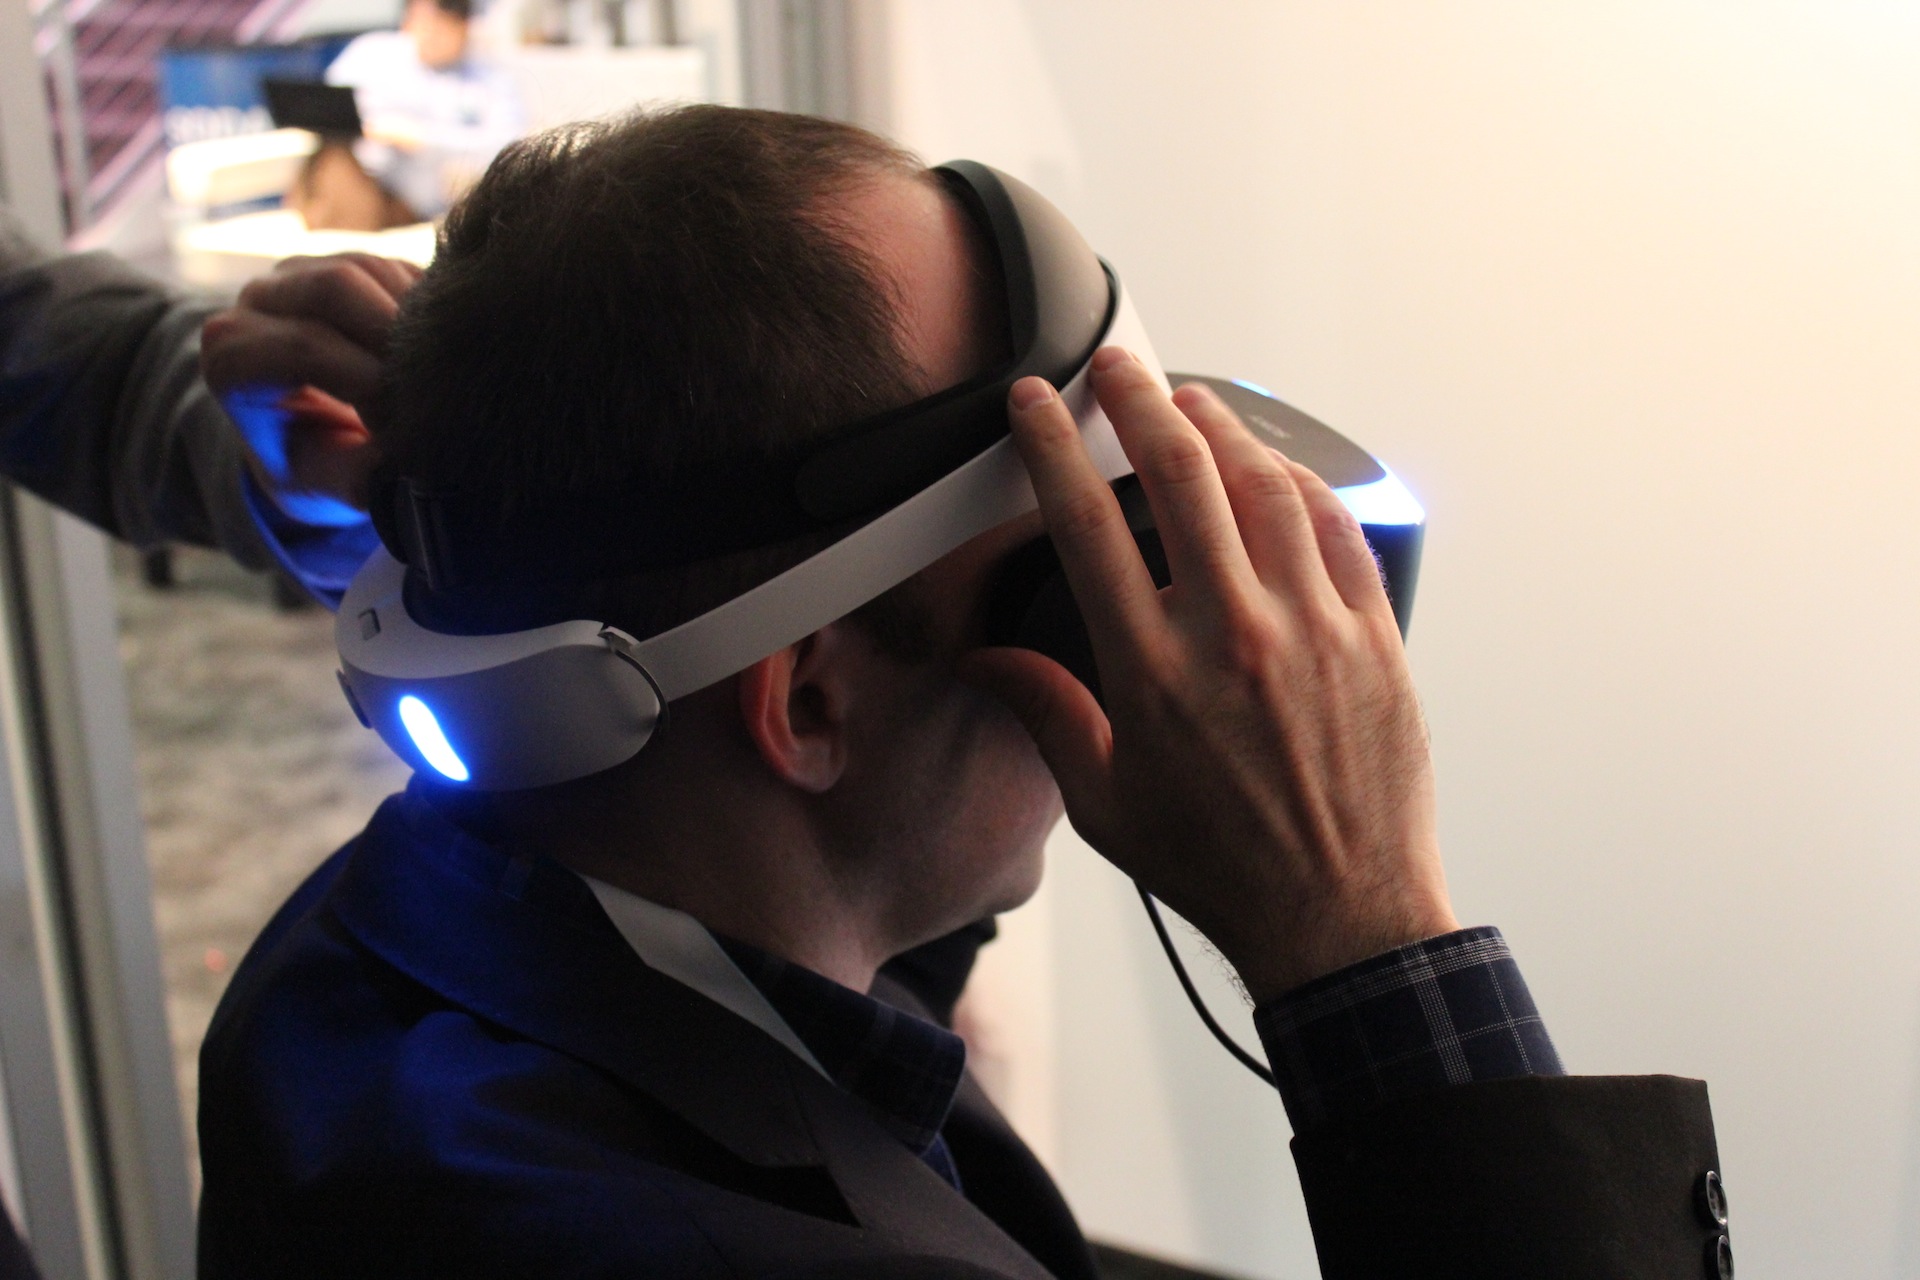 We Just Tried Sony’s PS4 Virtual Reality Headset. We Like It.